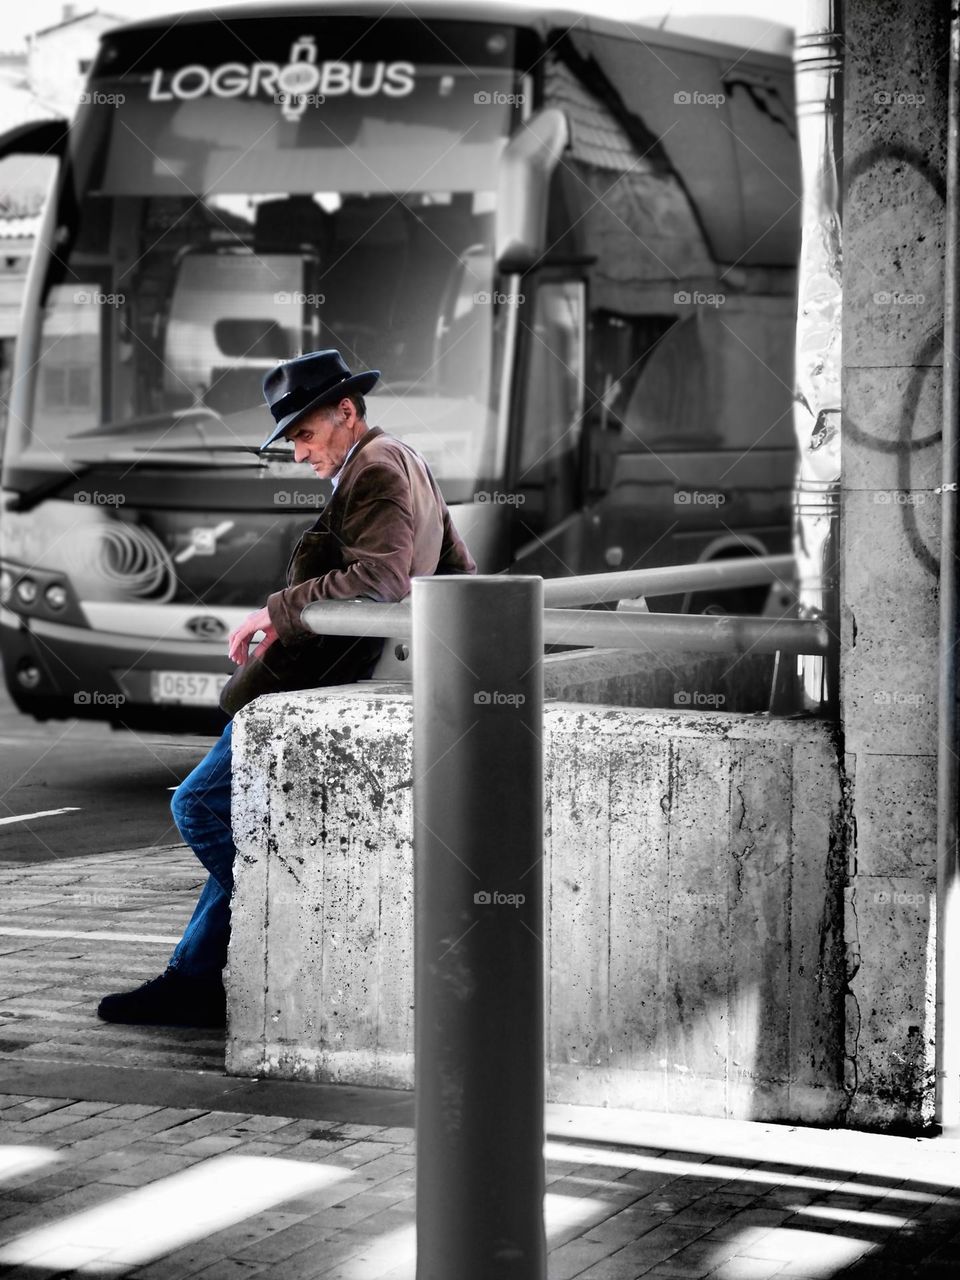 Man waiting for a bus in the city, portrait of a city, man waiting in the city, colors in black and white photo, background of black and white, old man waits, elderly man waiting in the city